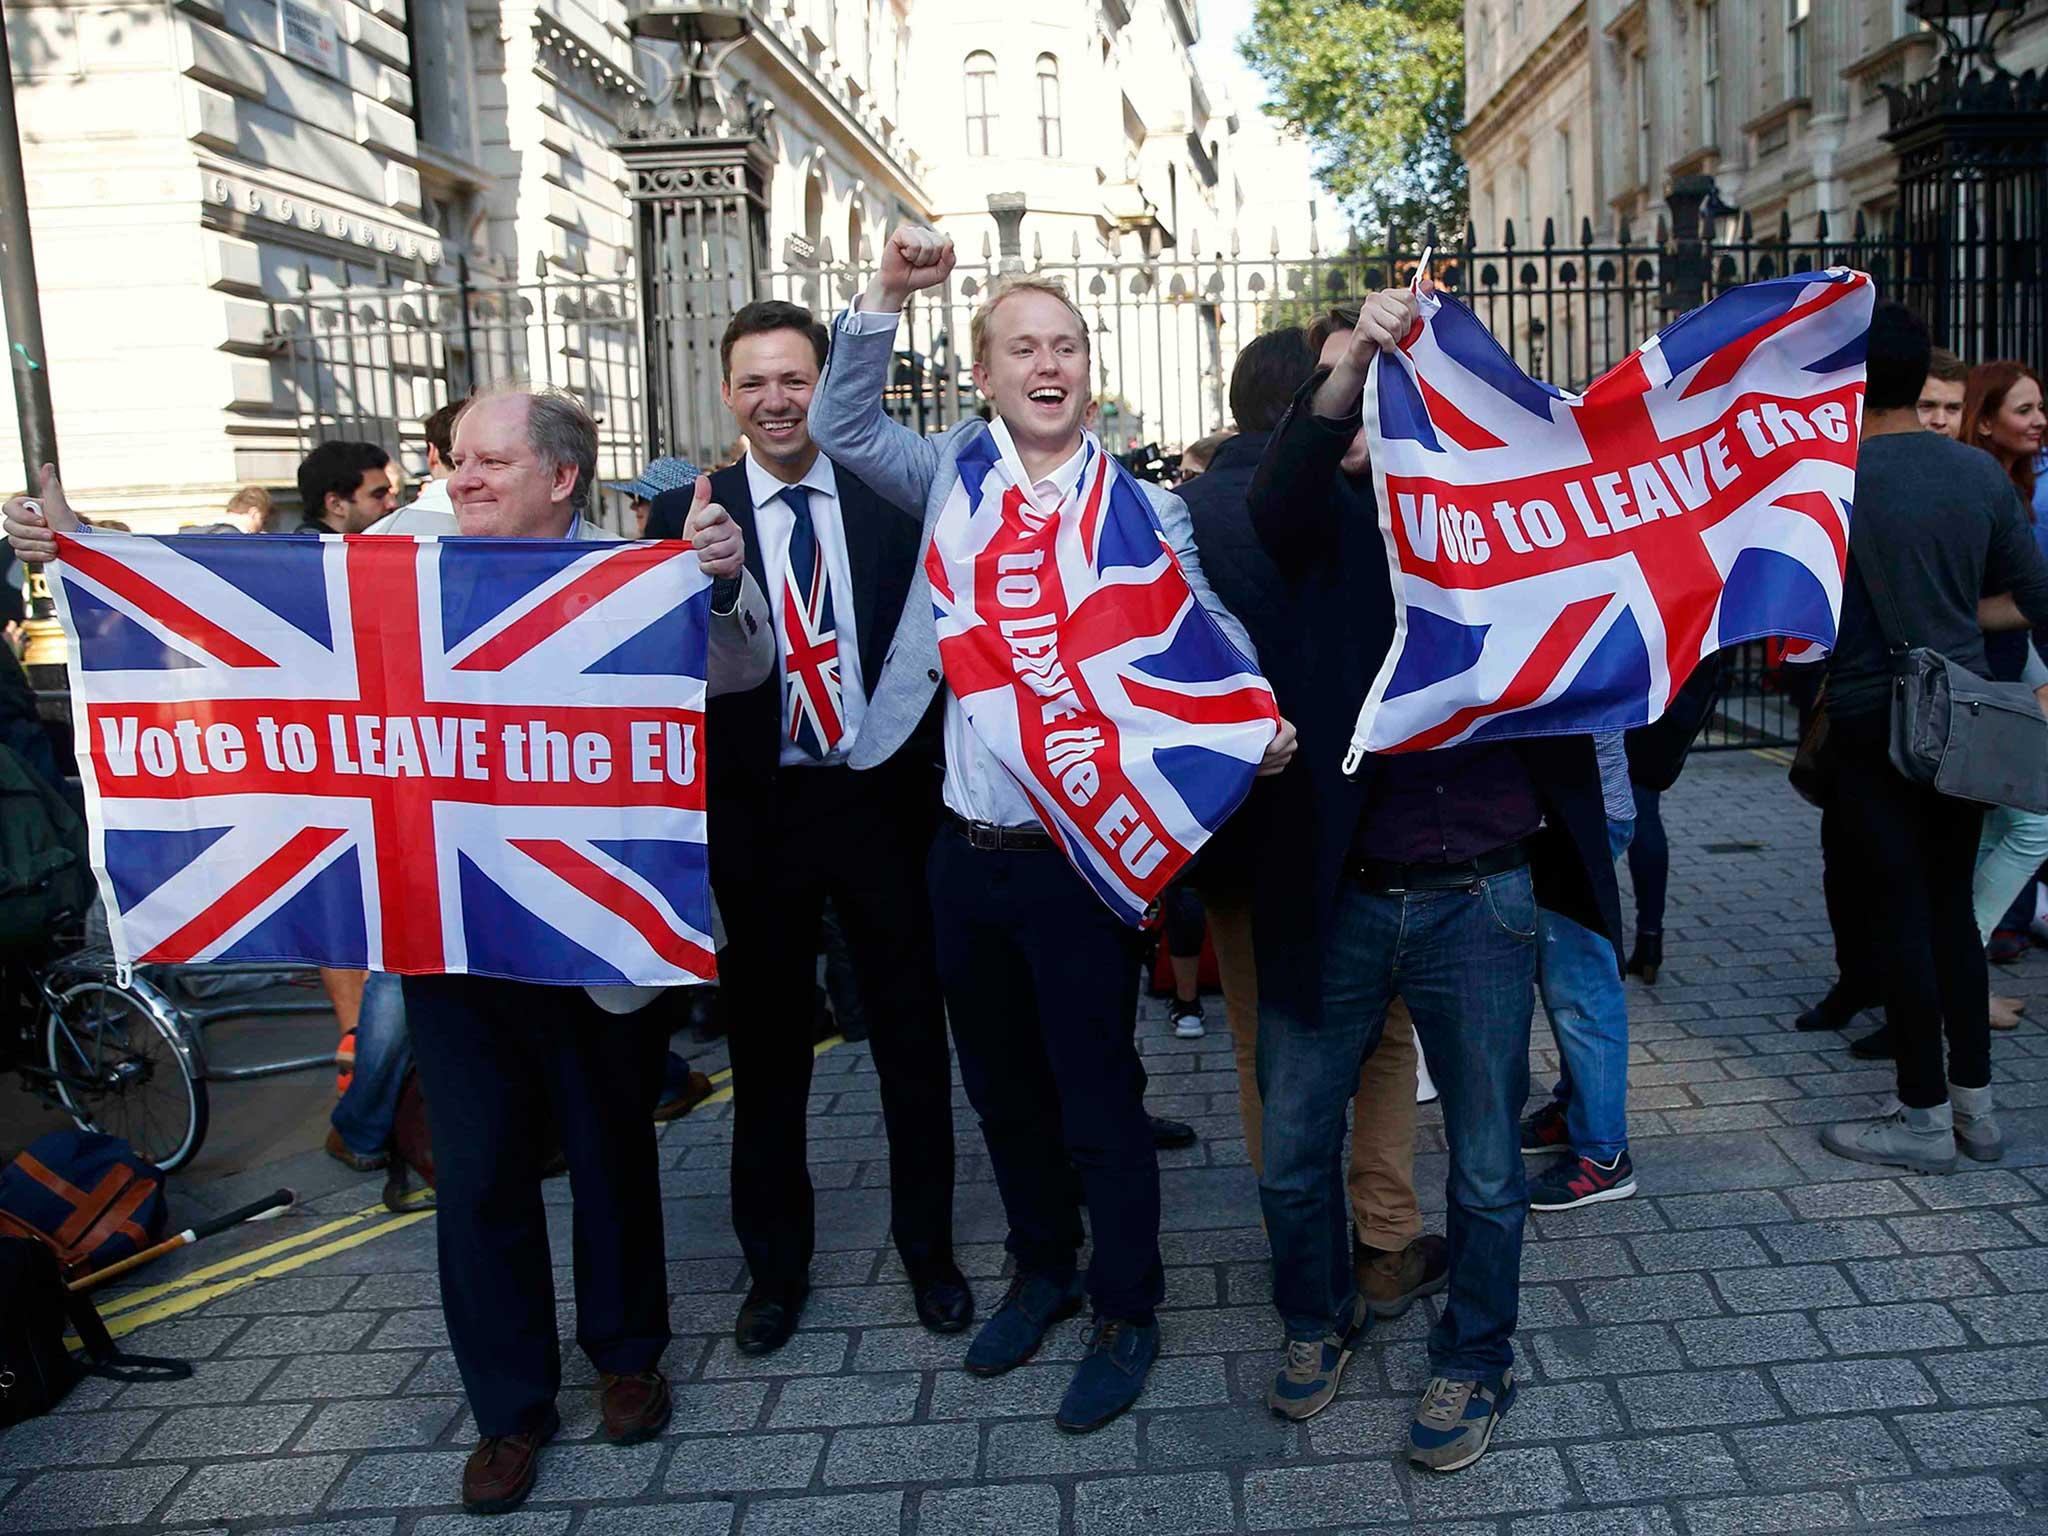 Vote leave supporters wave Union flags, following the result of the EU referendum, outside Downing Street in London